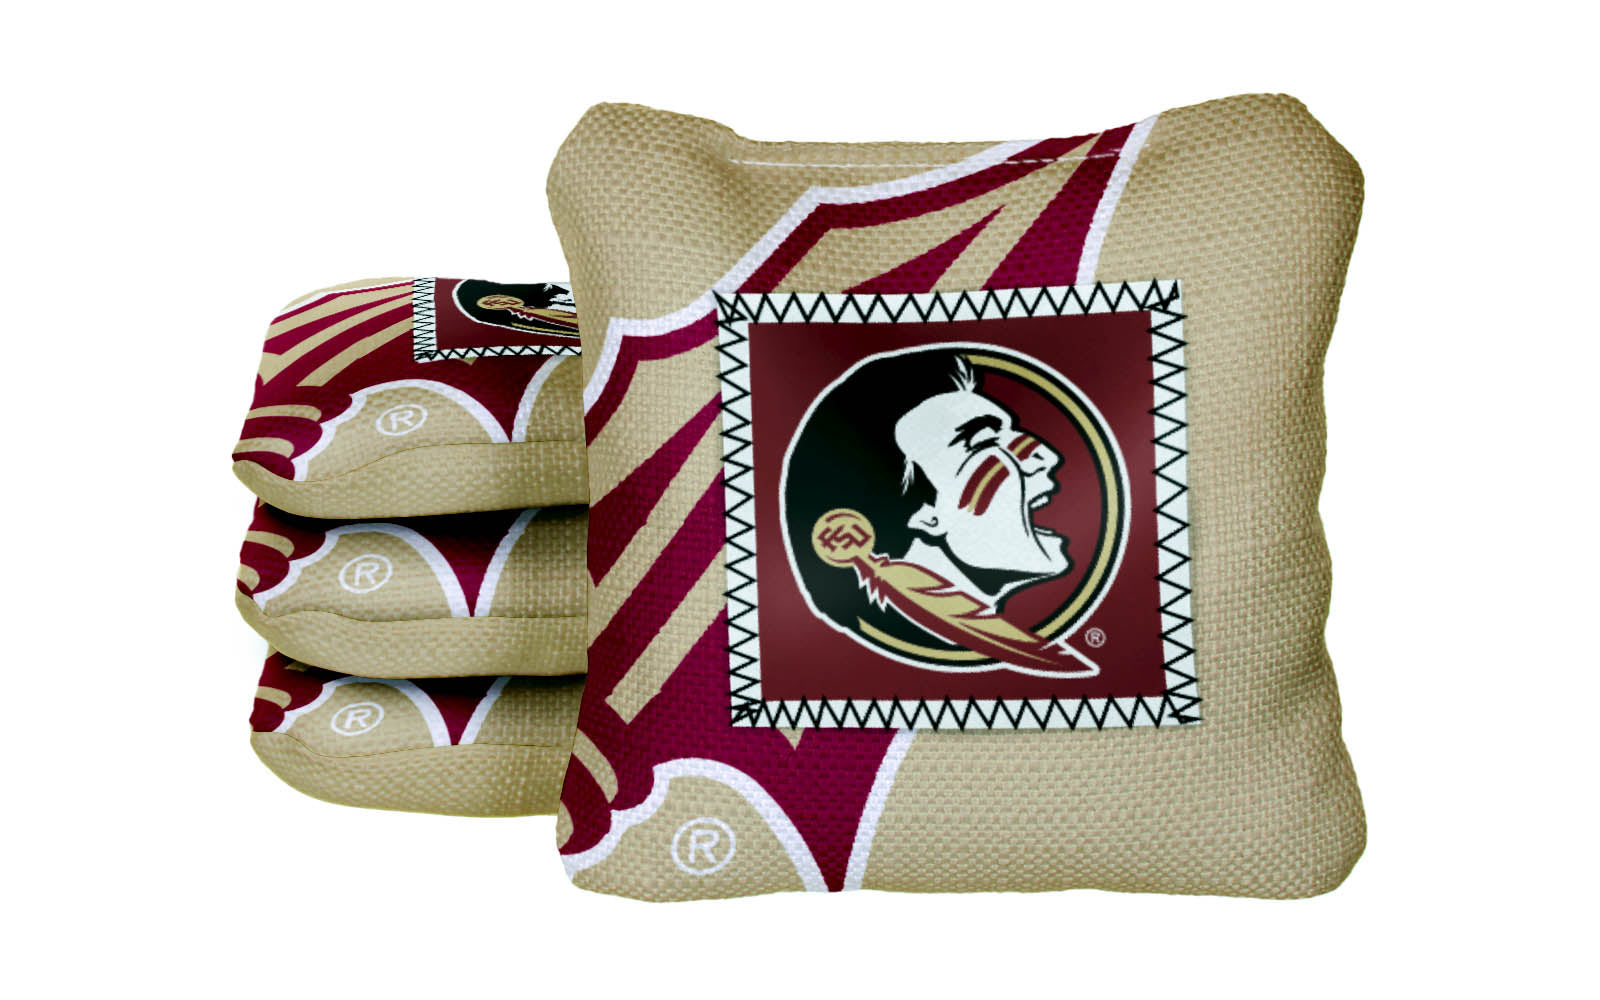 Officially Licensed Collegiate Cornhole Bags - Gamechanger Steady 2.0 - Set of 4 - Florida State University